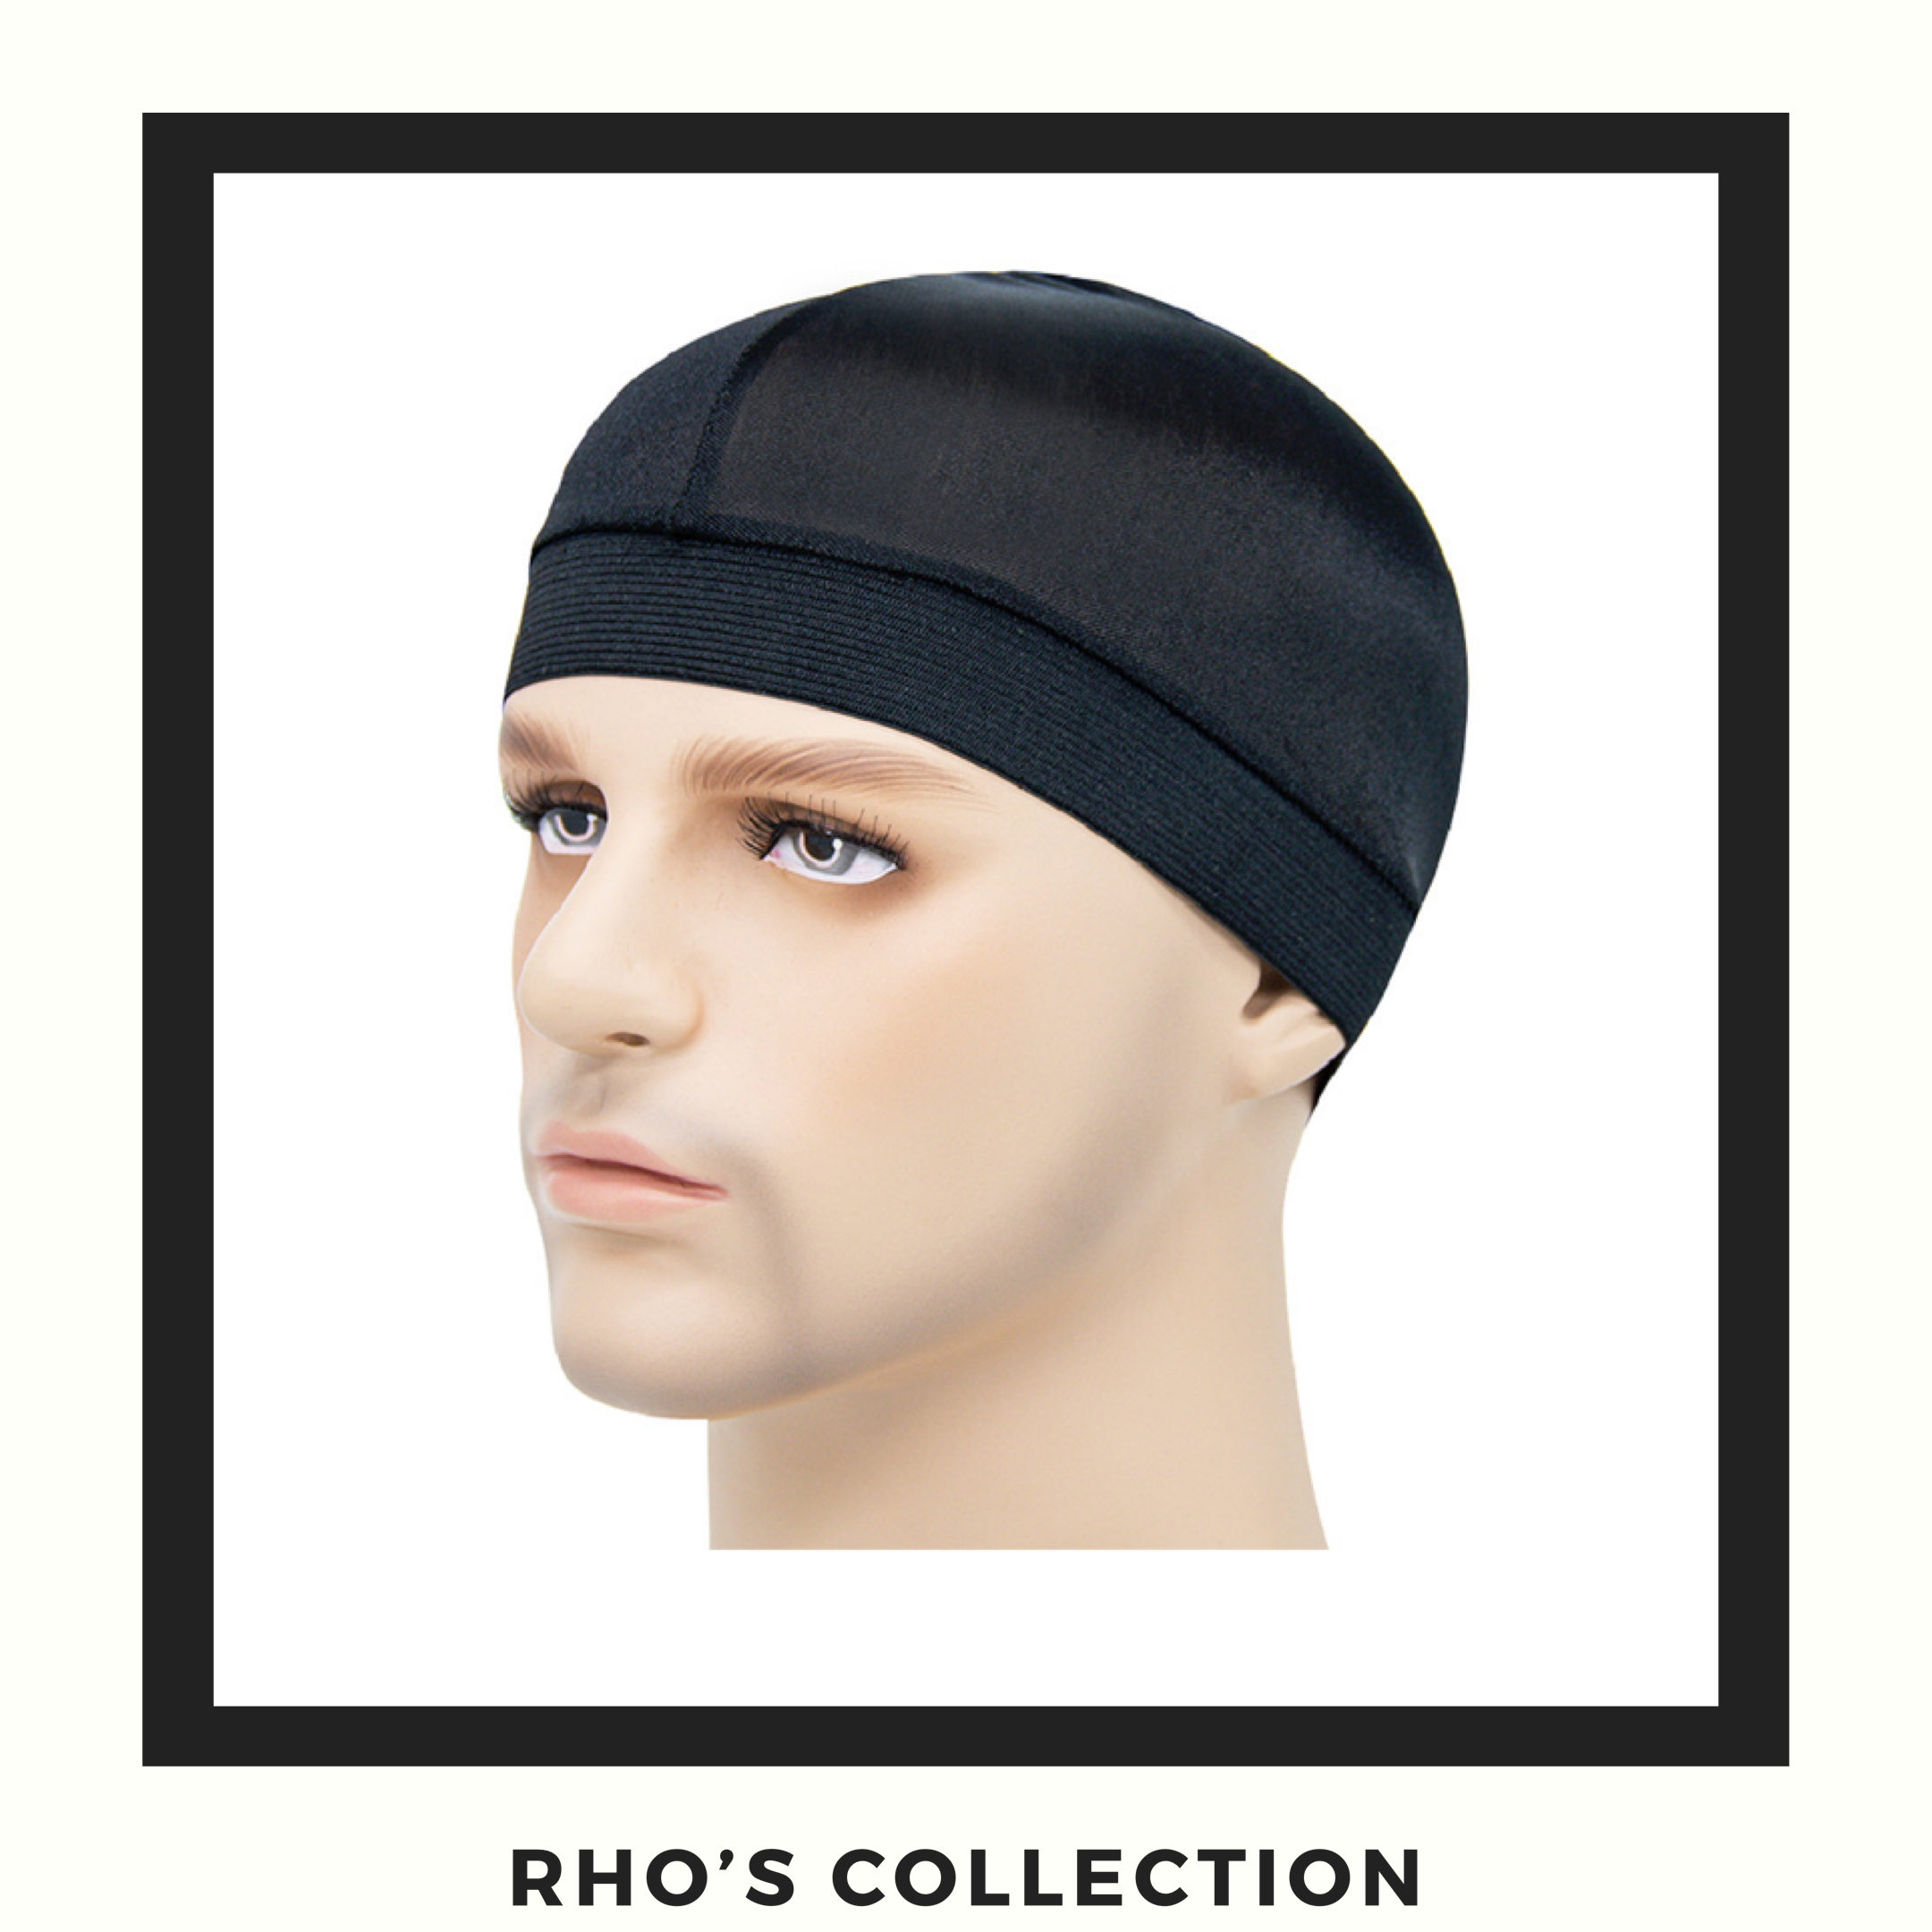 Rho's Wave cap - Rho's Collection